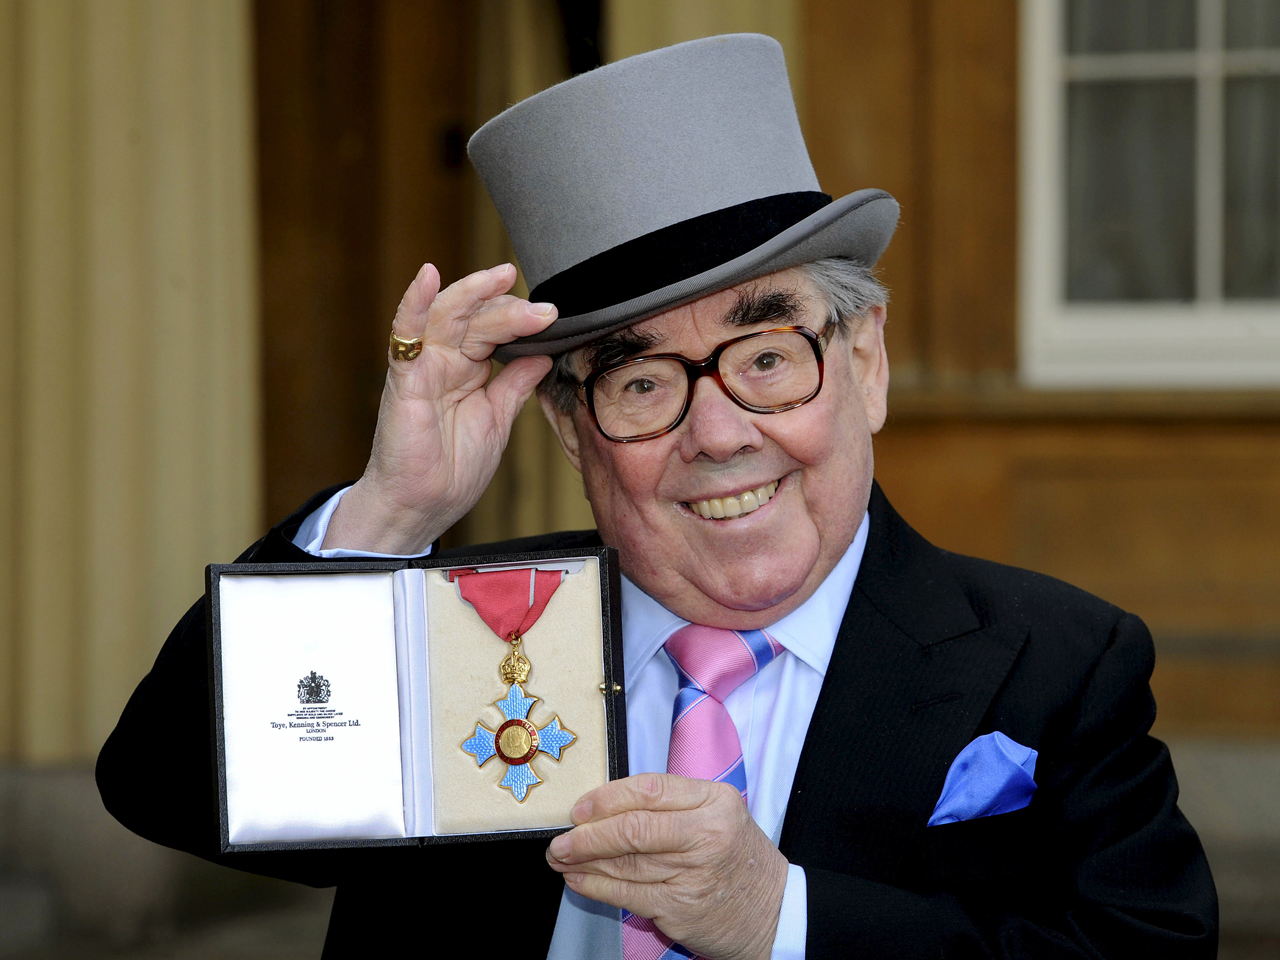 Ronnie Corbett Half Of Comedy S Two Ronnies Dies At 85 Cbs News